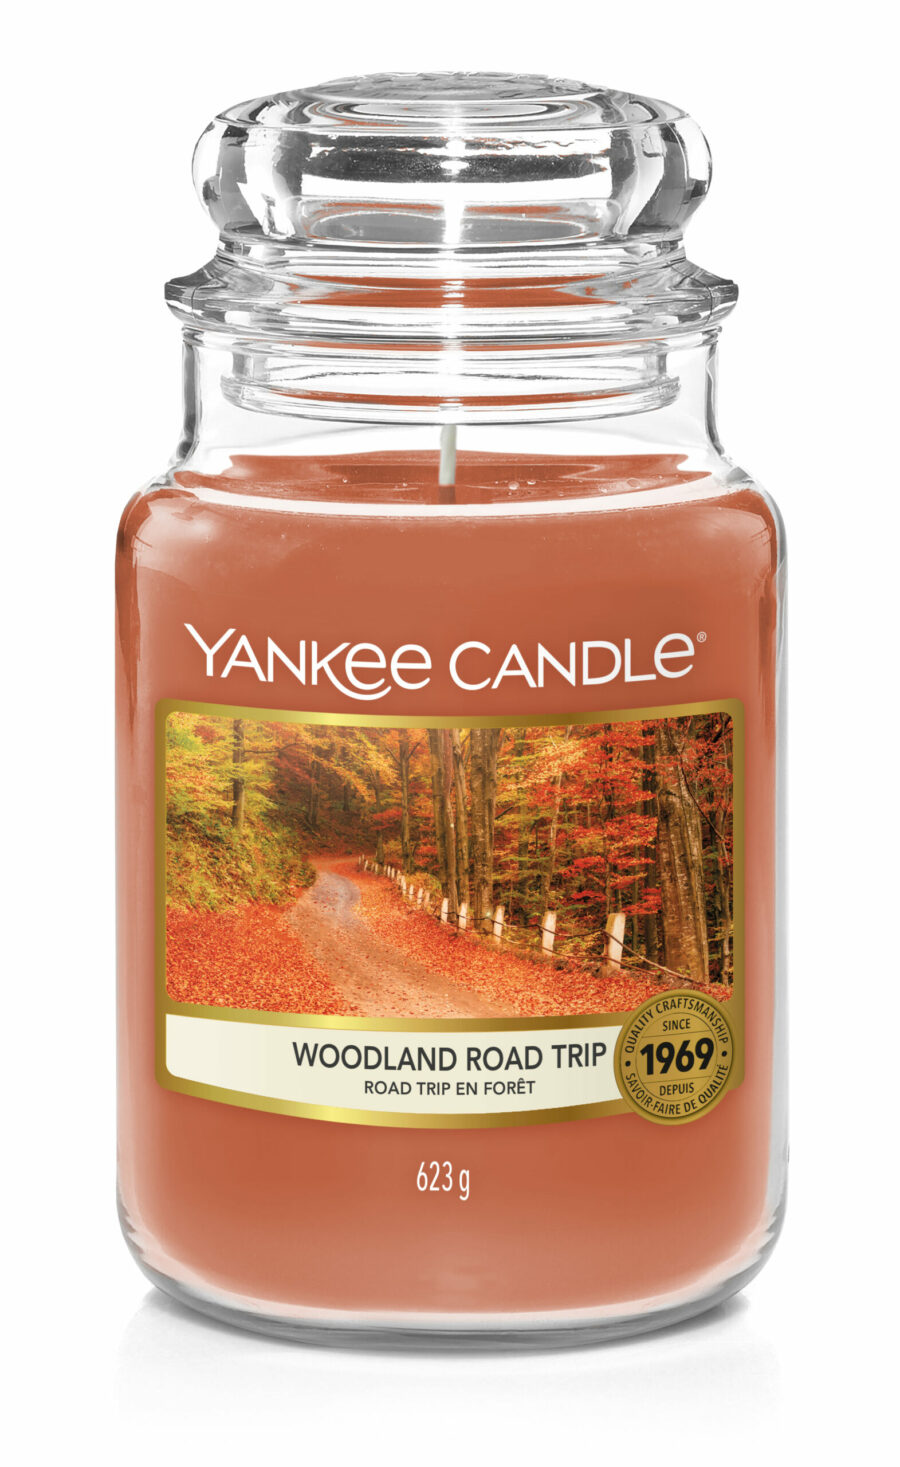 The best autumn candles from Yankee Candle